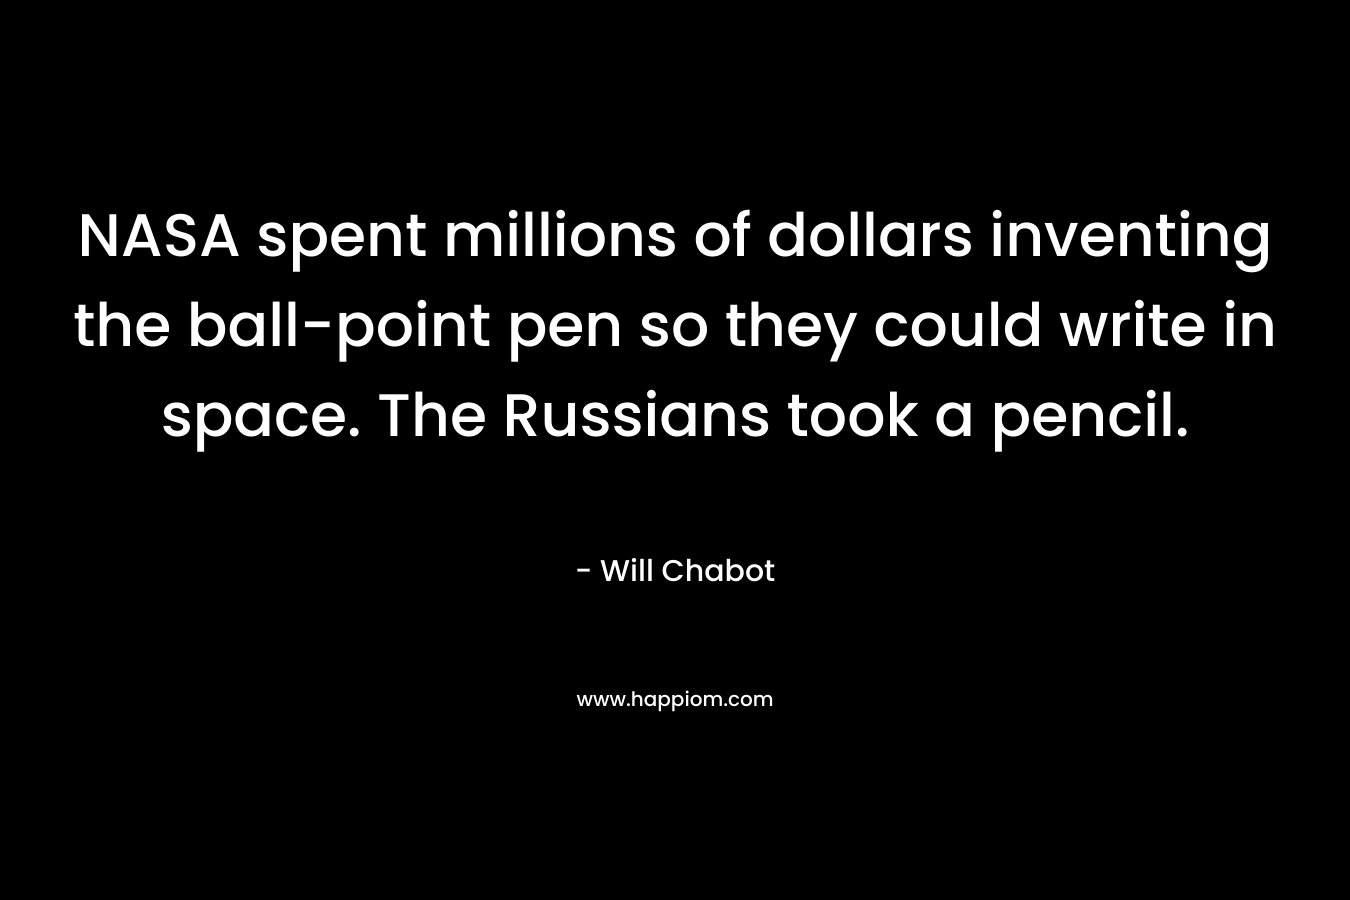 NASA spent millions of dollars inventing the ball-point pen so they could write in space. The Russians took a pencil. – Will Chabot